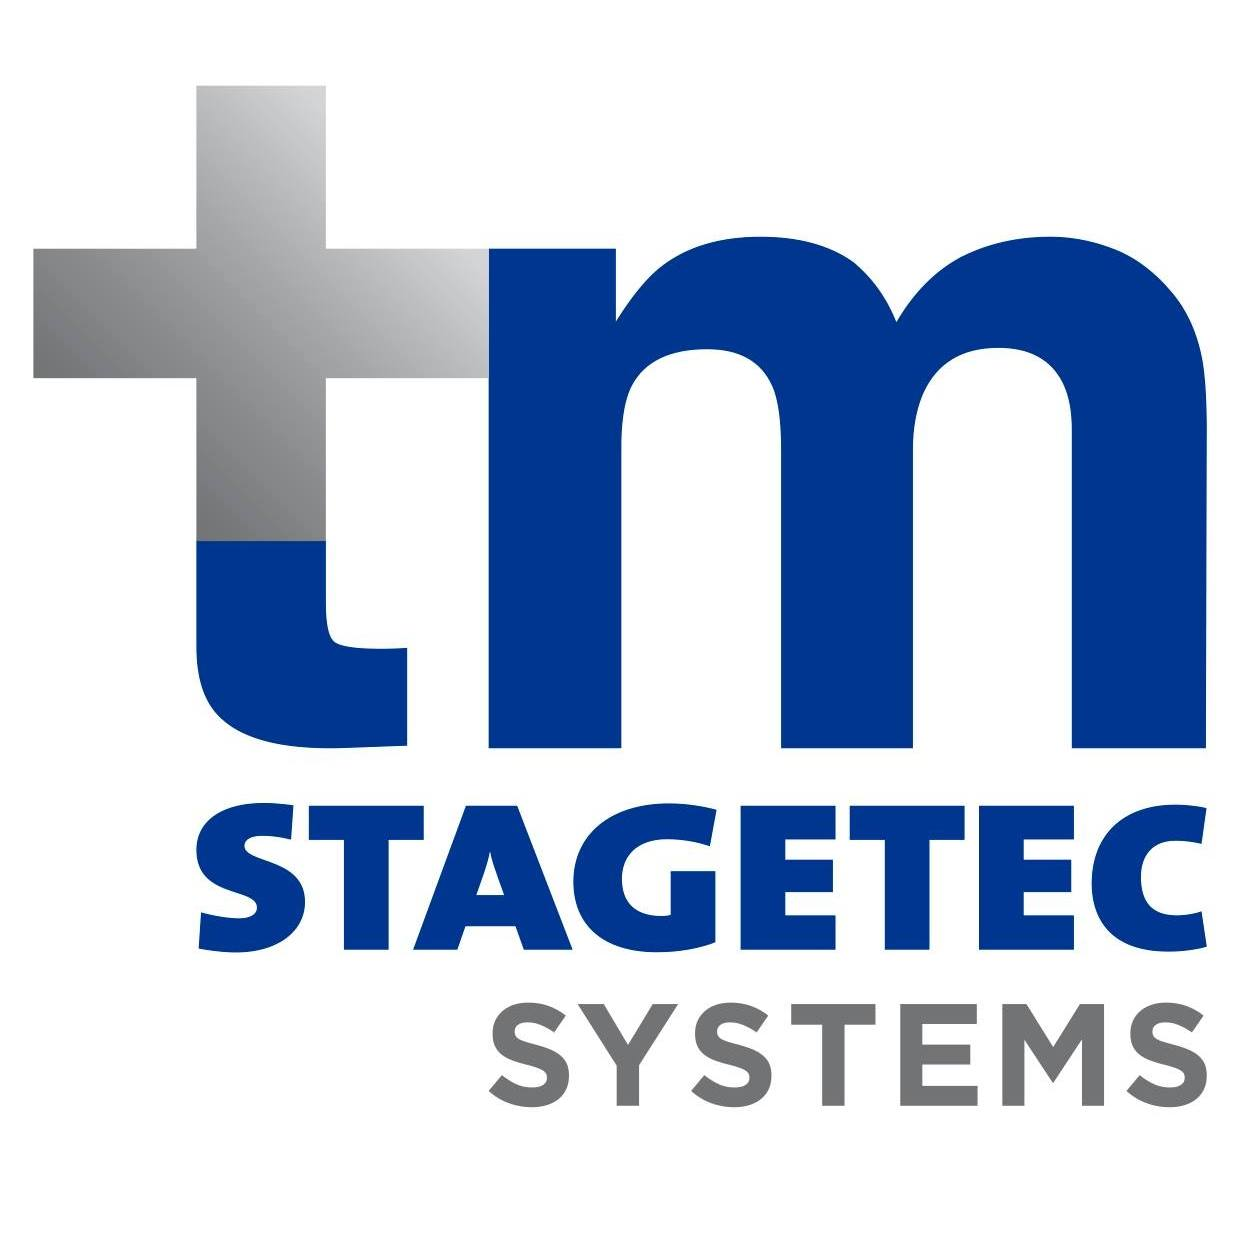 tm stagetec systems'